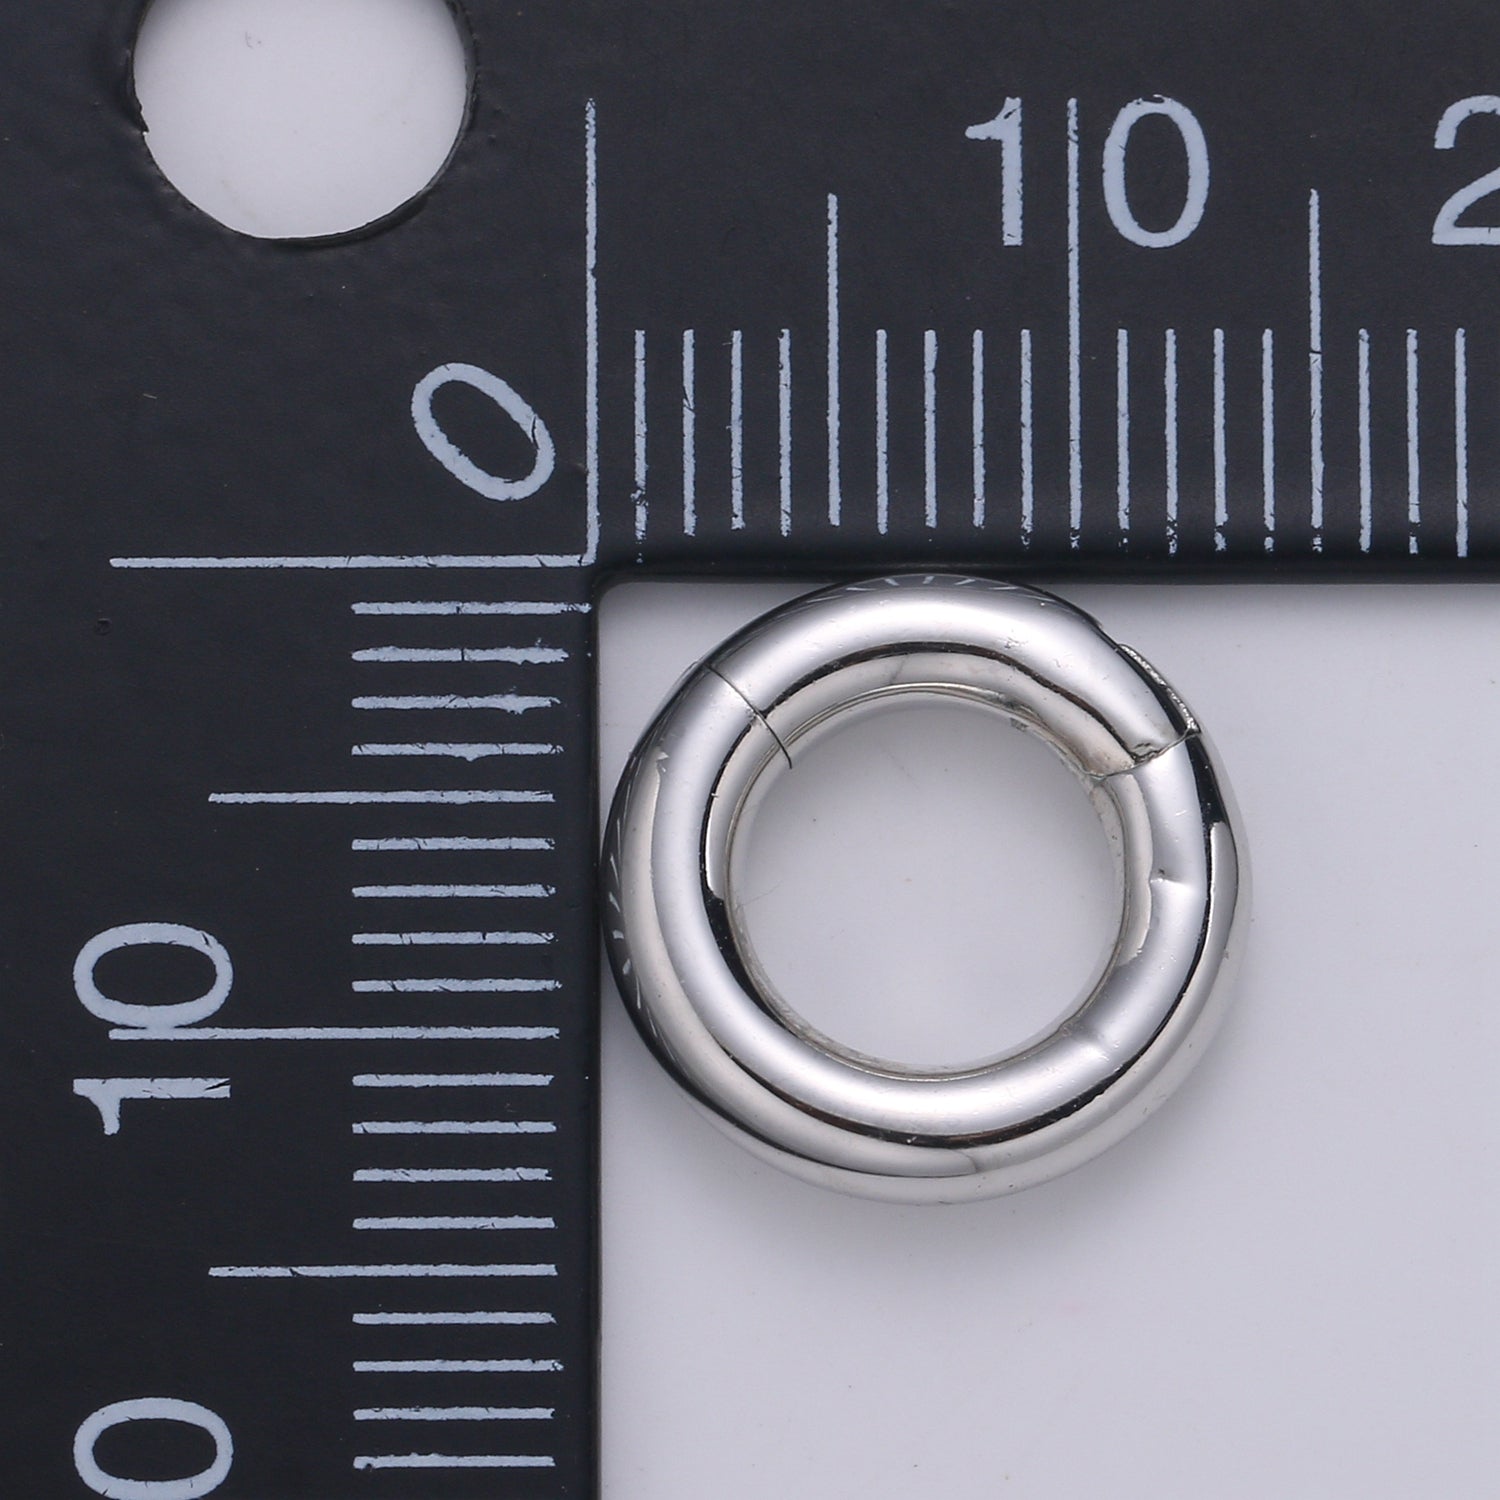 1 Pc 925 Sterling Silver Hollow Spring Gate Ring, 13 mm Push Gate ring, Charm Holder Clasp for Connector, Wristlet Holder - DLUXCA